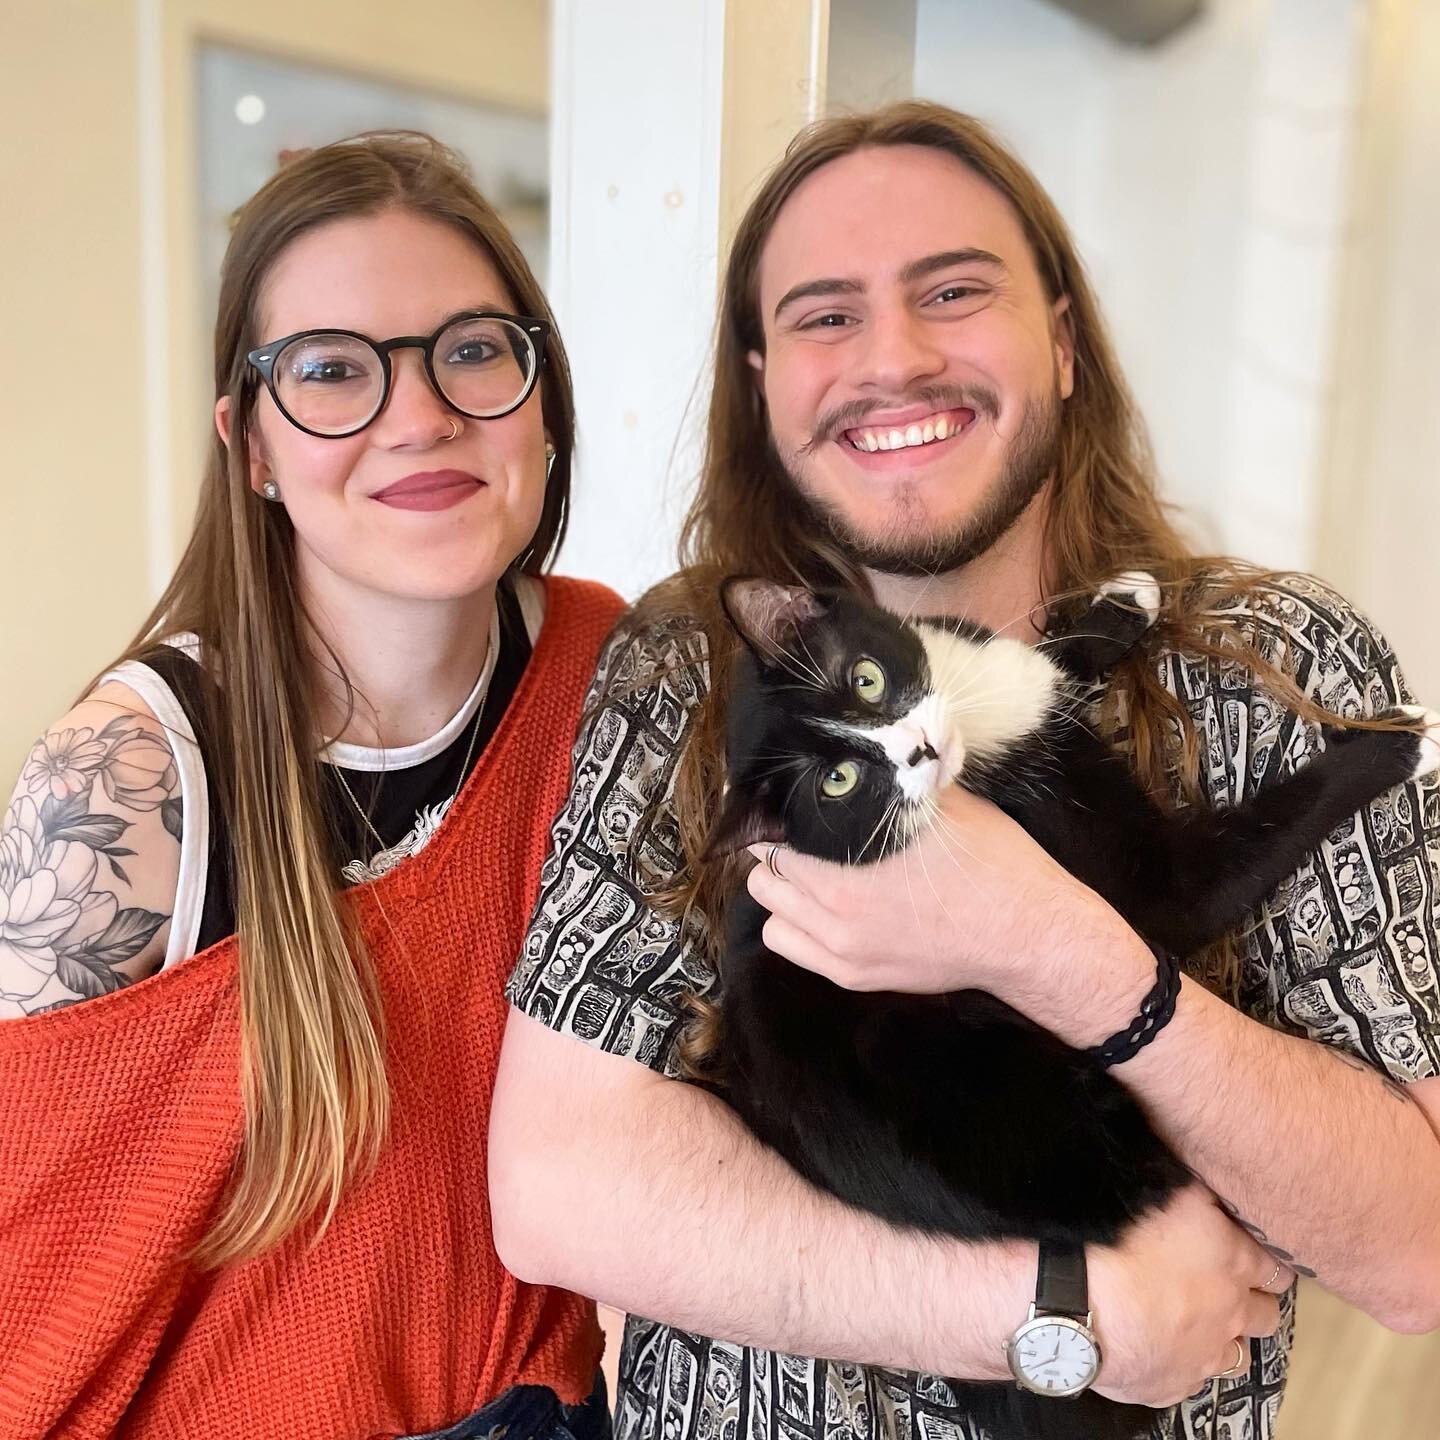 After nearly 3 months at the cafe, everyone&rsquo;s favorite little troublemaker finally found her forever home!!! 😹❤️

Tracy is officially off to live her best life with the most wonderful parents AND a new tabby sibling to play and cuddle with! We